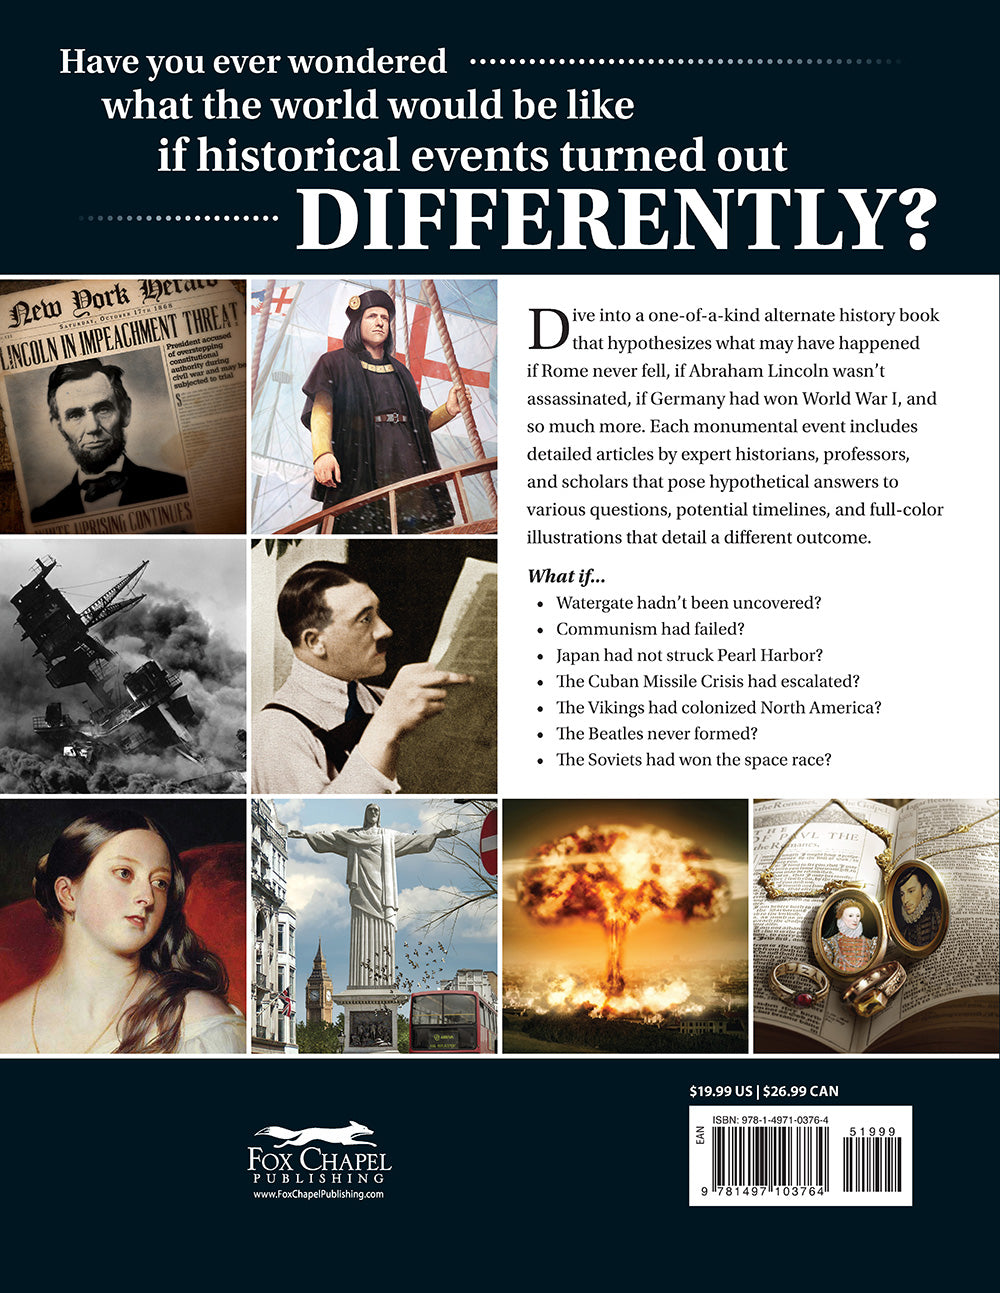 What If…Book of Alternative History